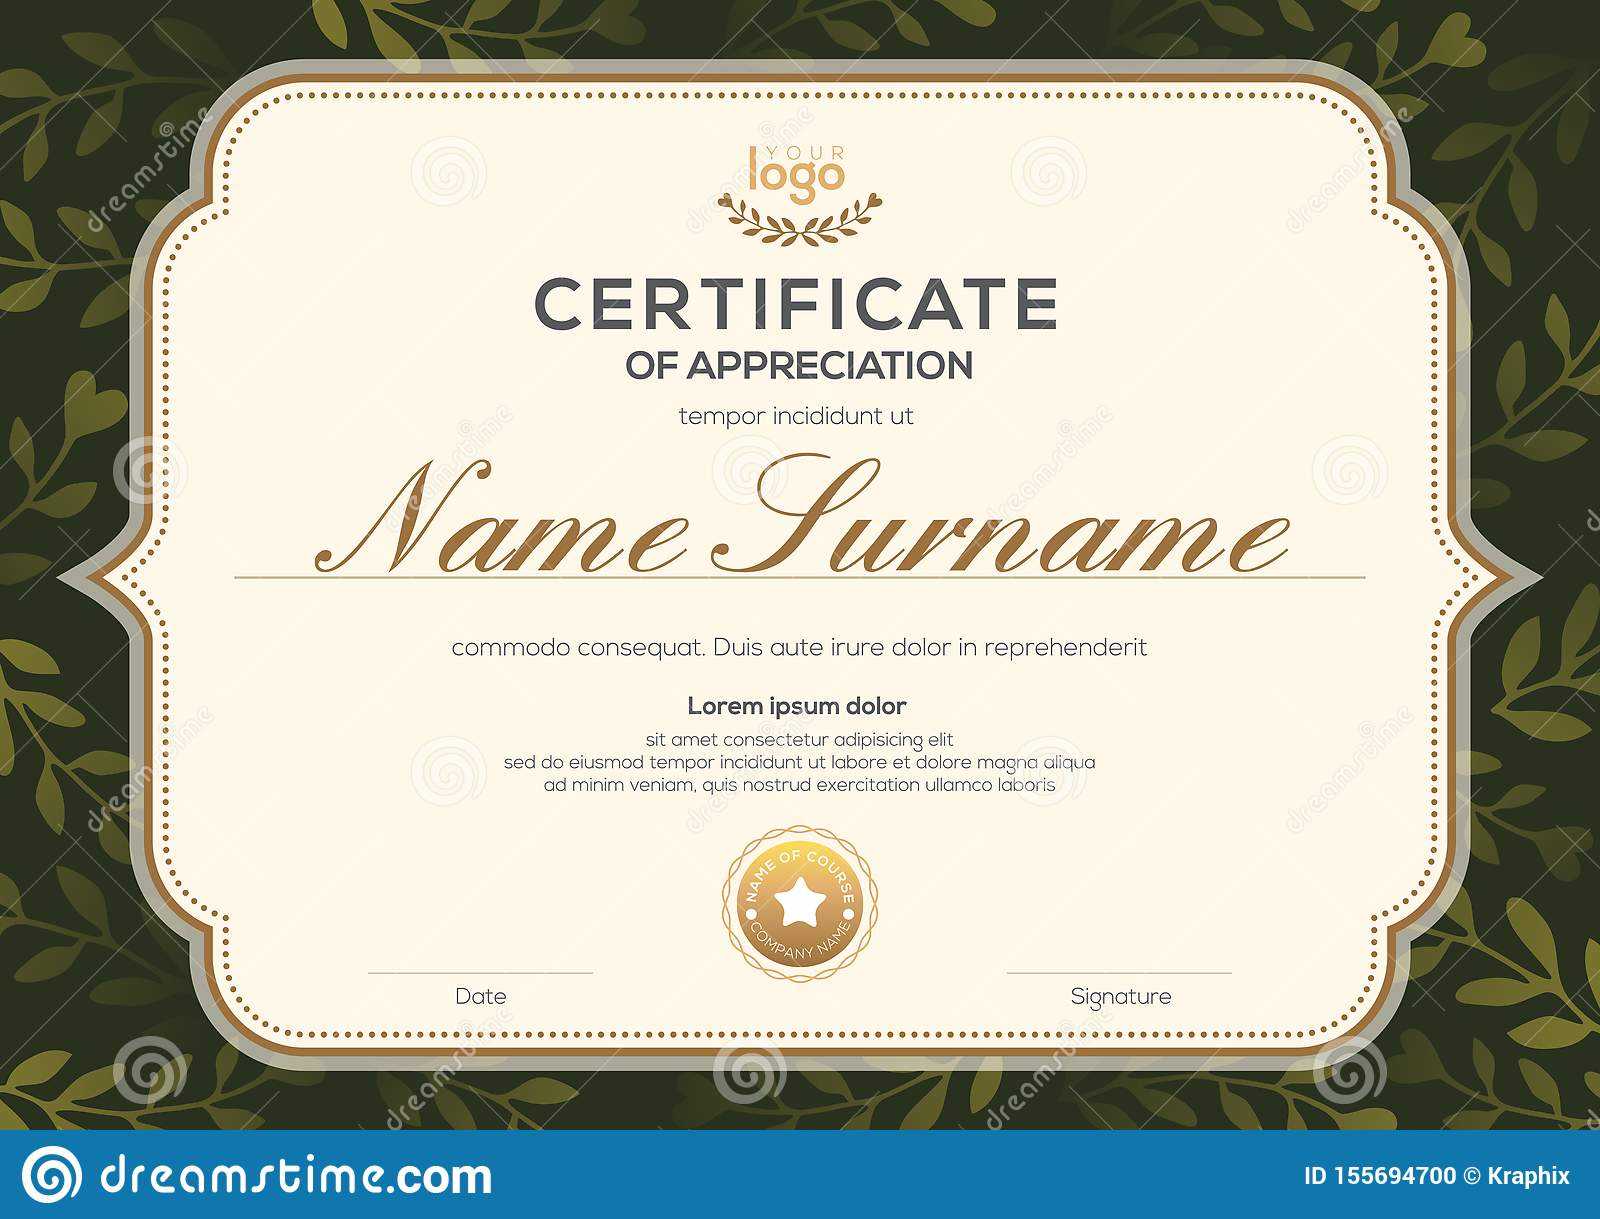 Certificate Template With Vintage Frame On Dark Green Floral Pertaining To Commemorative Certificate Template